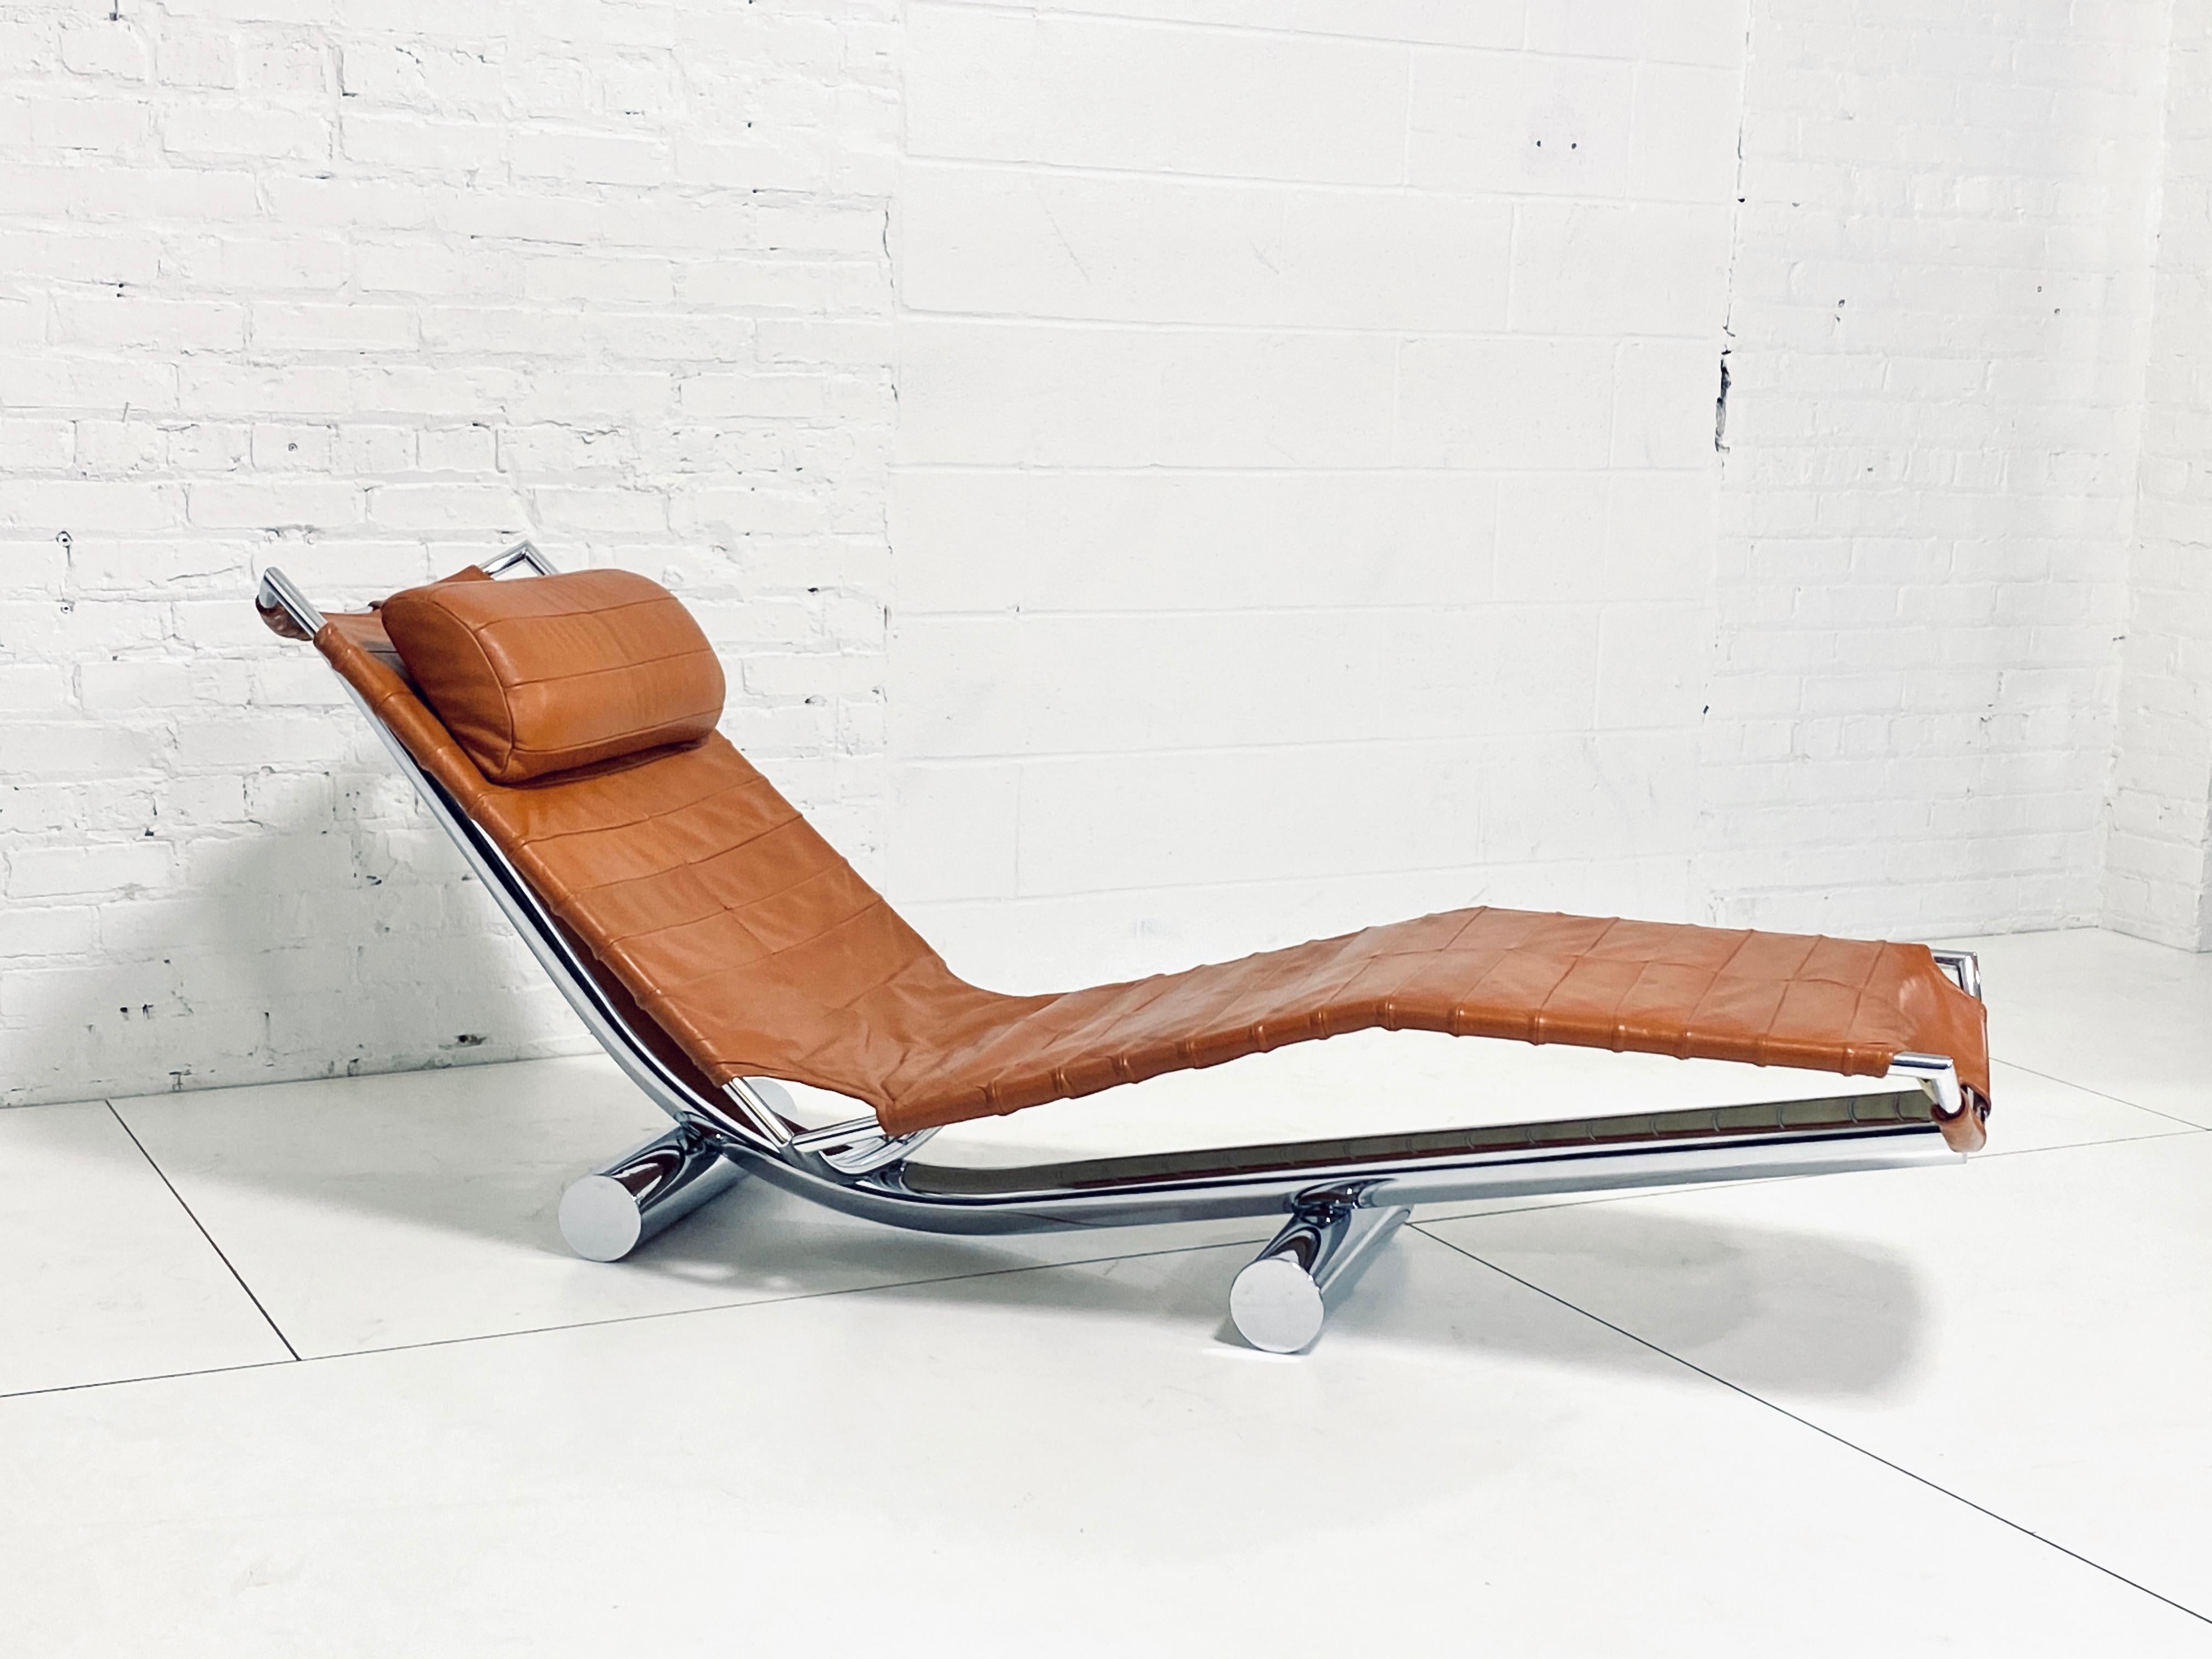 Chariot chaise lounge designed by Paul Tuttle for Strassle International. Produced in Switzerland in 1972. Original camel brown leather and polished chrome frame are in excellent condition.